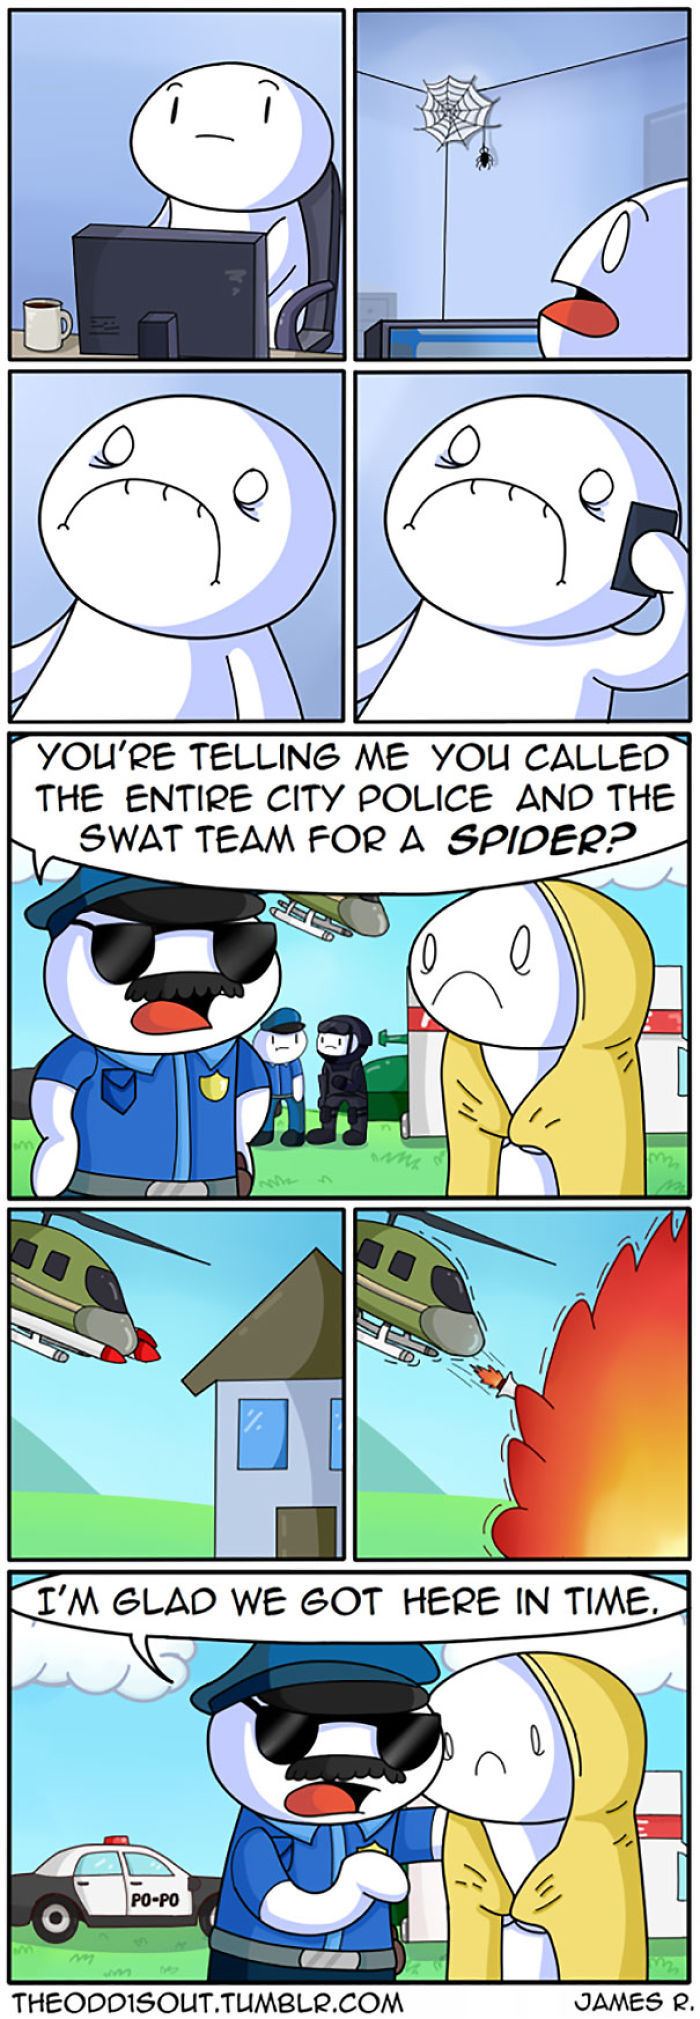 25+ Comics By Theodd1sout That Have The Most Unexpected ...